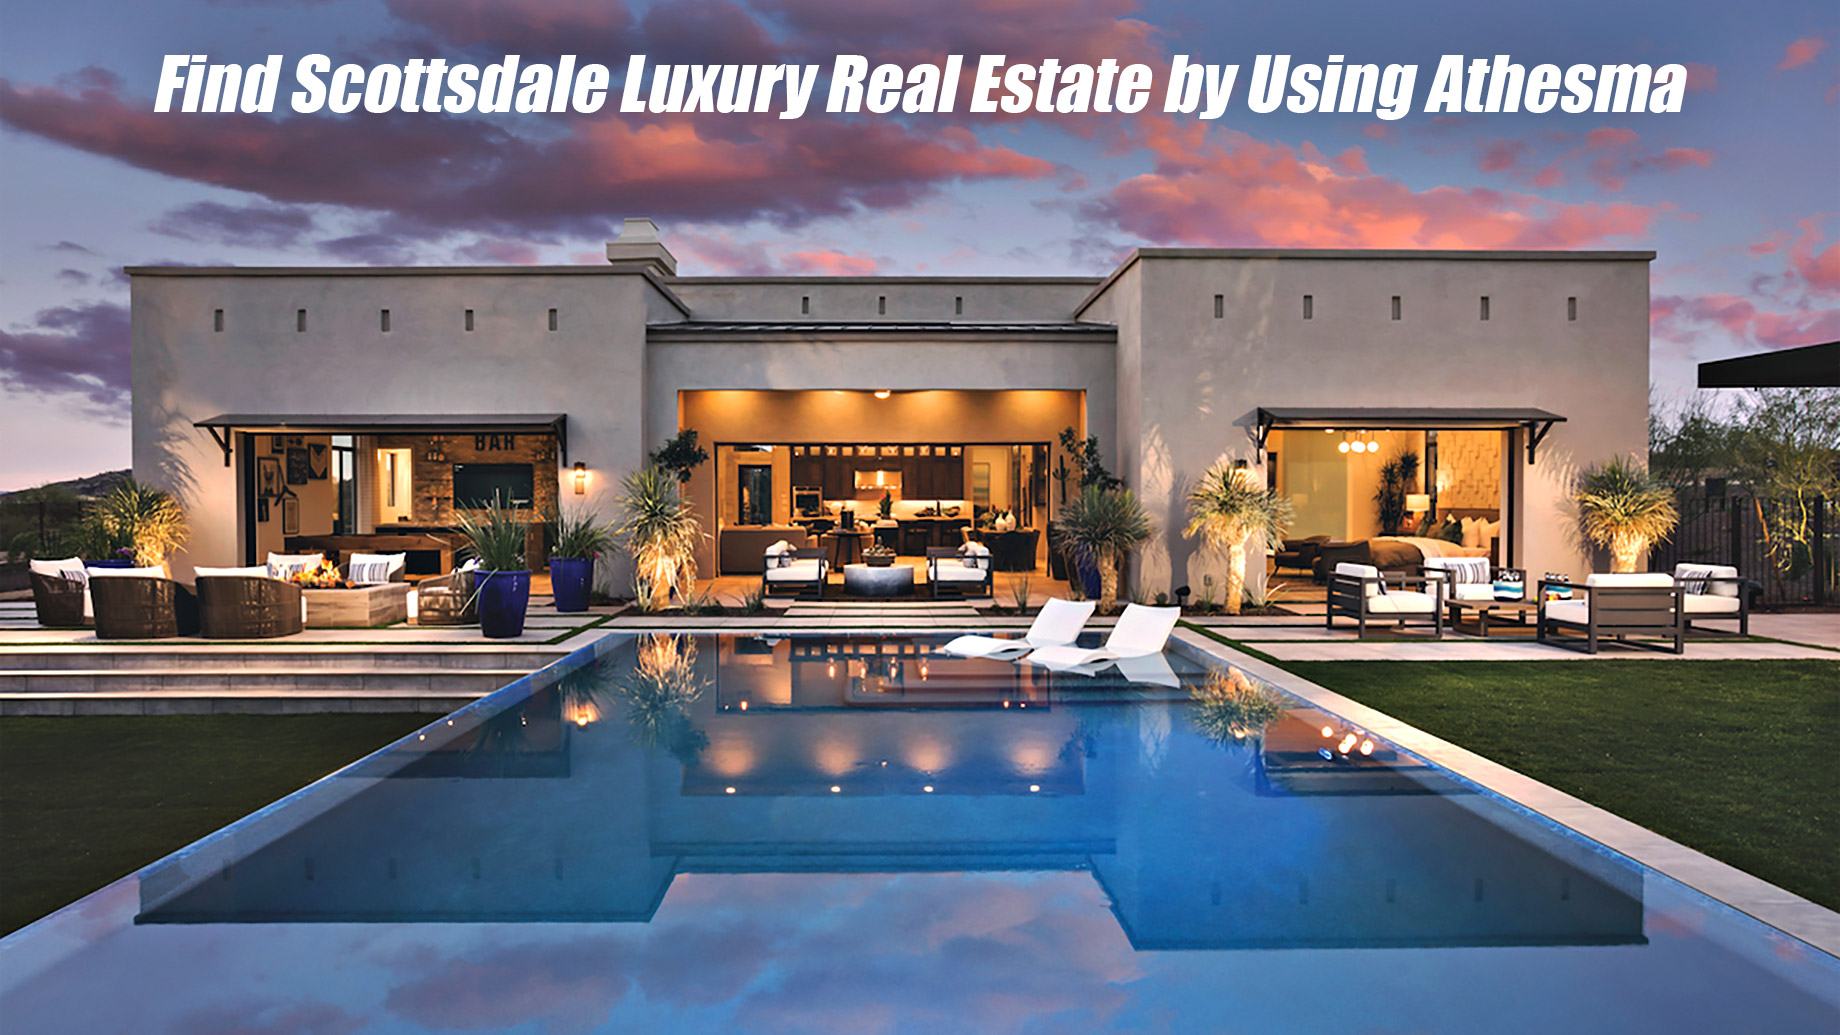 Find Scottsdale Luxury Real Estate by Using Athesma